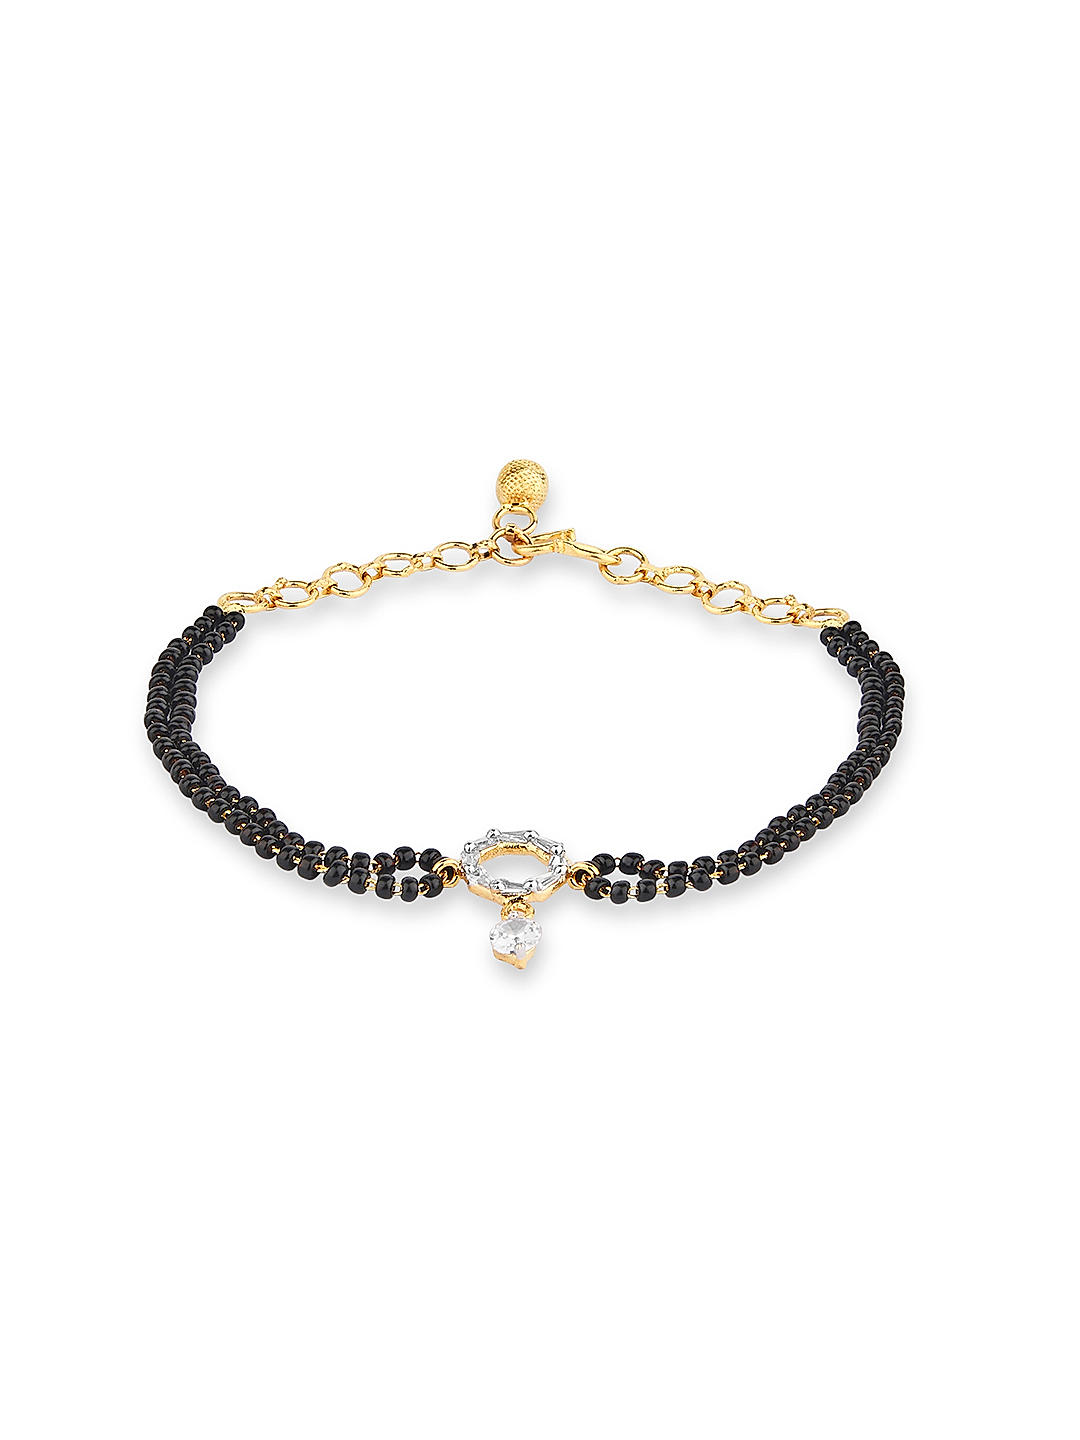 18K Solid Yellow Gold Double Strand Mangalsutra Bracelet With Gold Chain  and Black Beads, Layered Gold Bracelet, Indian Bridal Bracelet - Etsy |  Black beaded bracelets, Kids gold jewelry, Gold bracelet